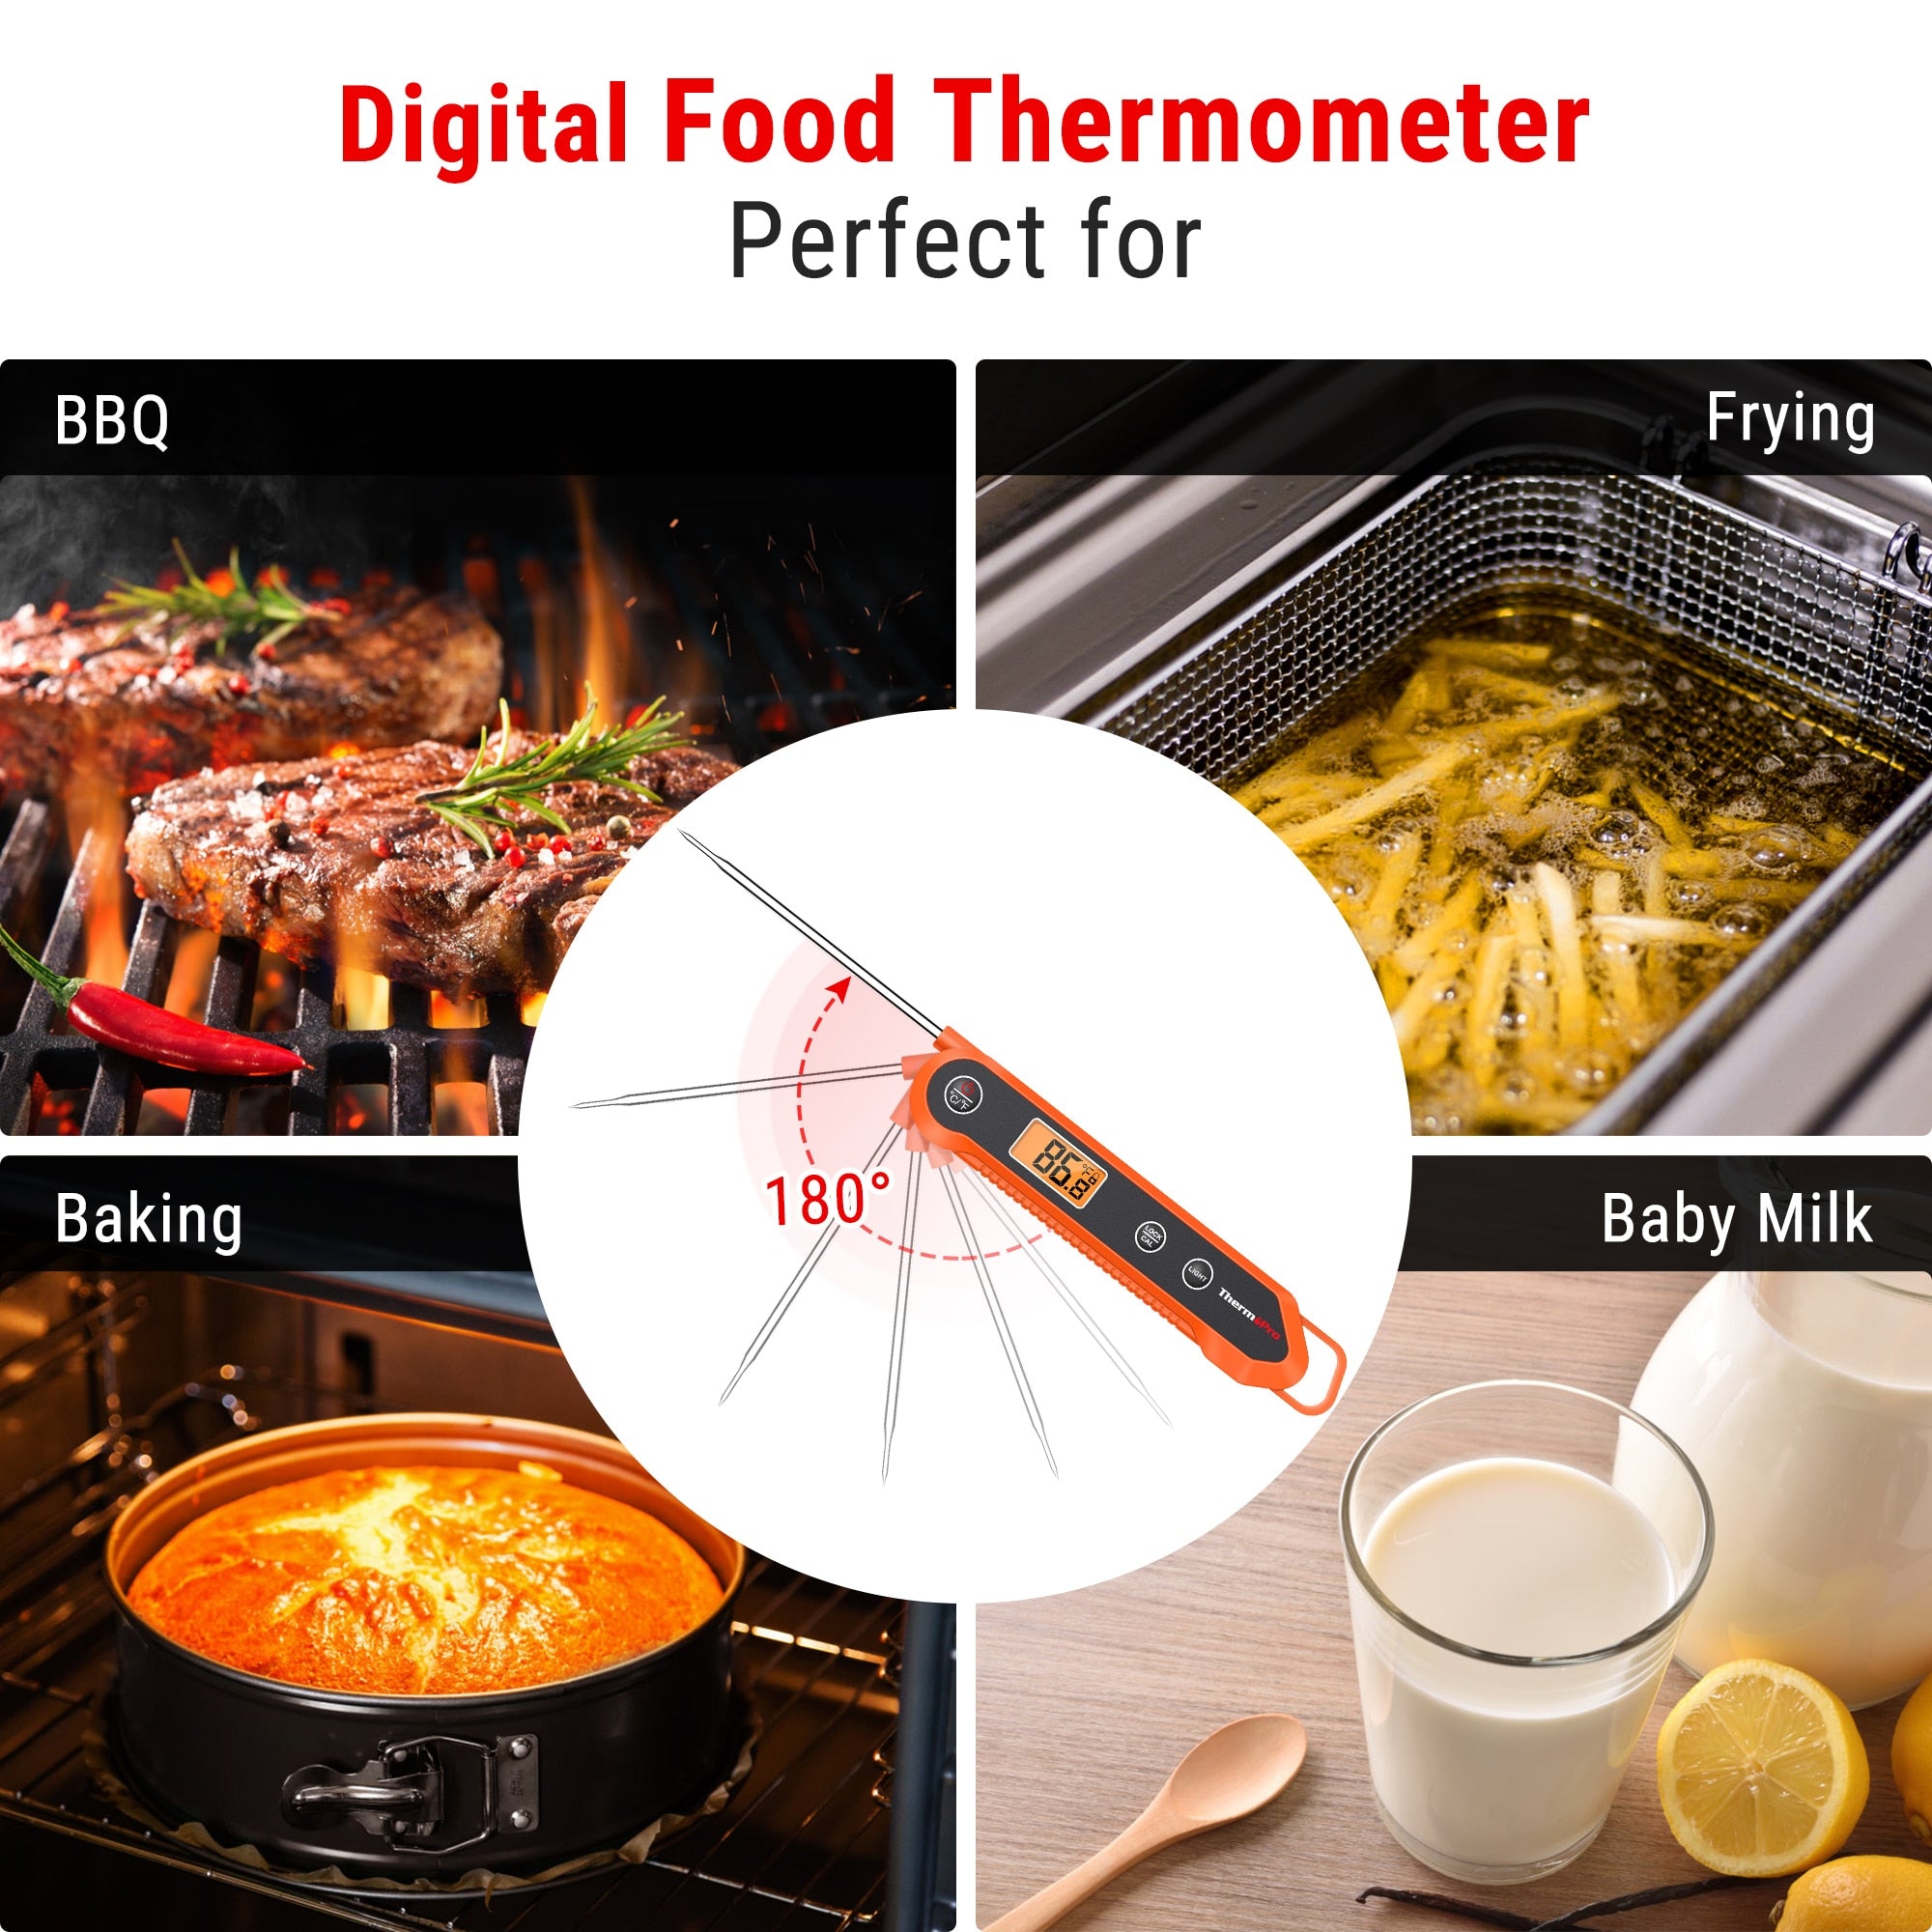 2PCS Internal Meat Thermometer Dual Probe Instant Read Meat